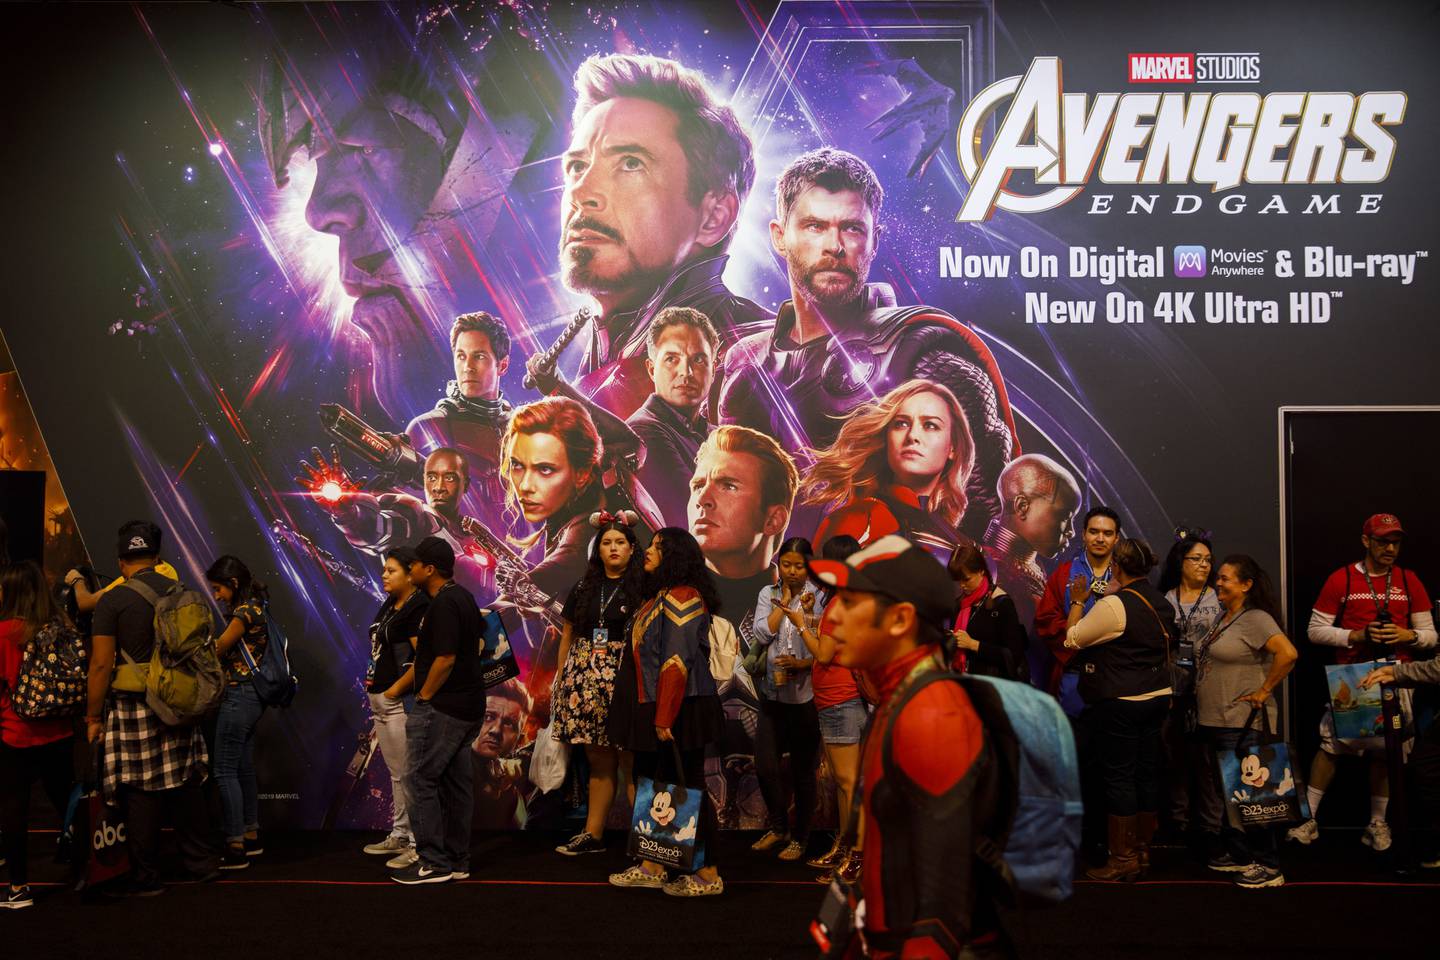 Attendees wait in line in front of a Marvel Studios Avengers Endgame poster during the D23 Expo 2019 in Anaheim, California, U.S., on Friday, Aug. 23, 2019. Walt Disney Co. is turning the D23 Expo, the biennial fan conclave, into a big push for its new streaming services. Photographer: Patrick T. Fallon/Bloomberg